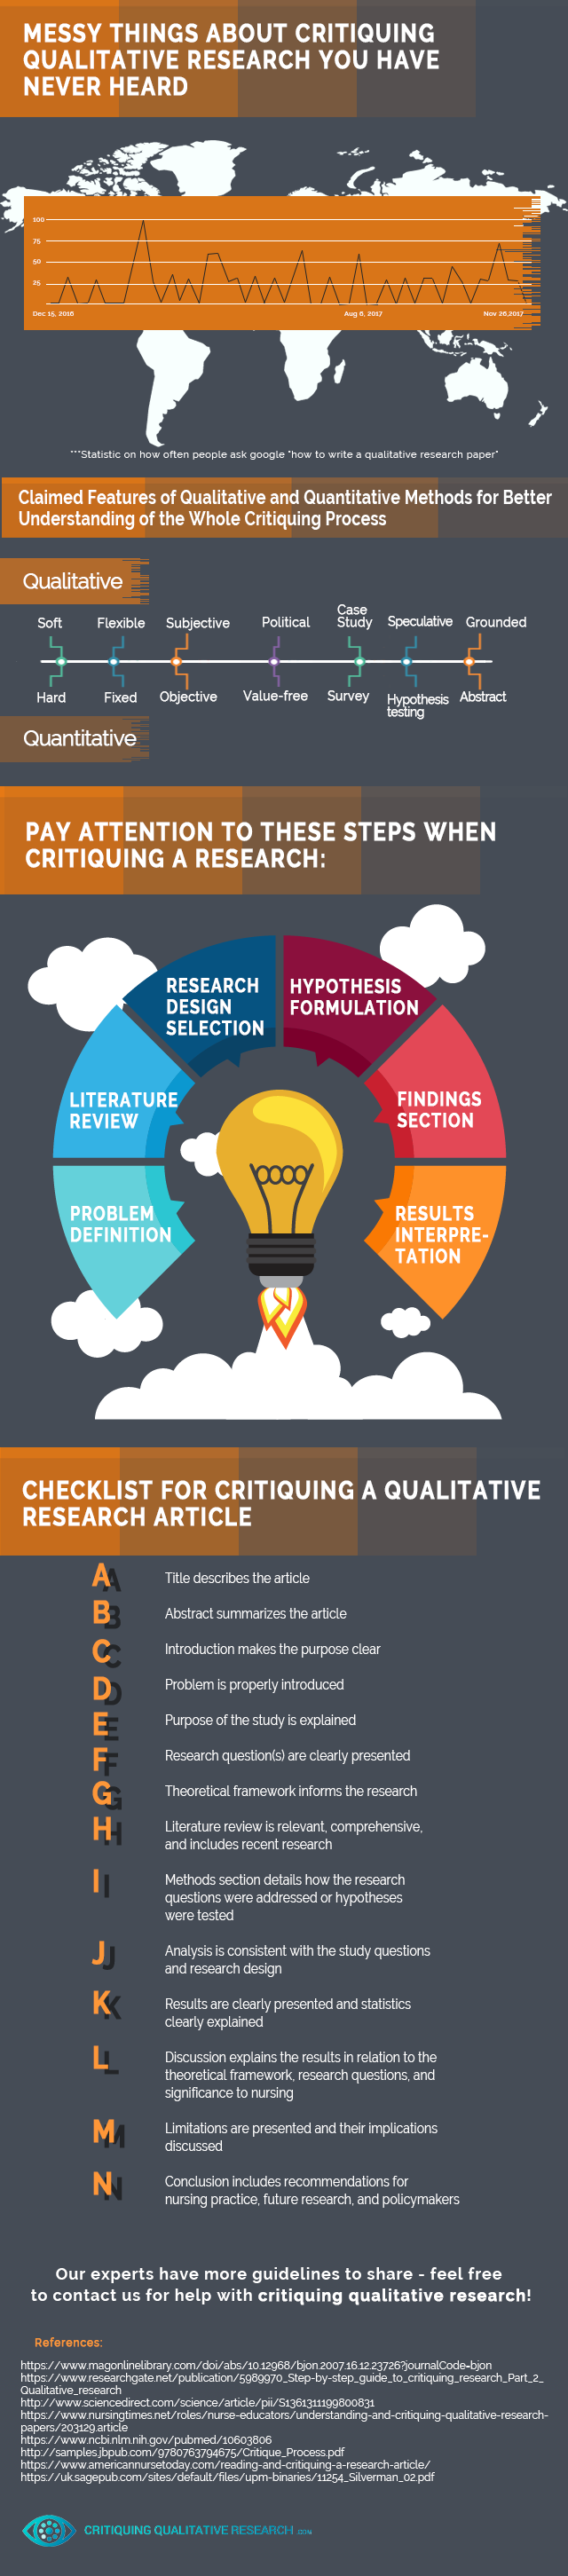 how-to-critique-a-qualitative-research-article